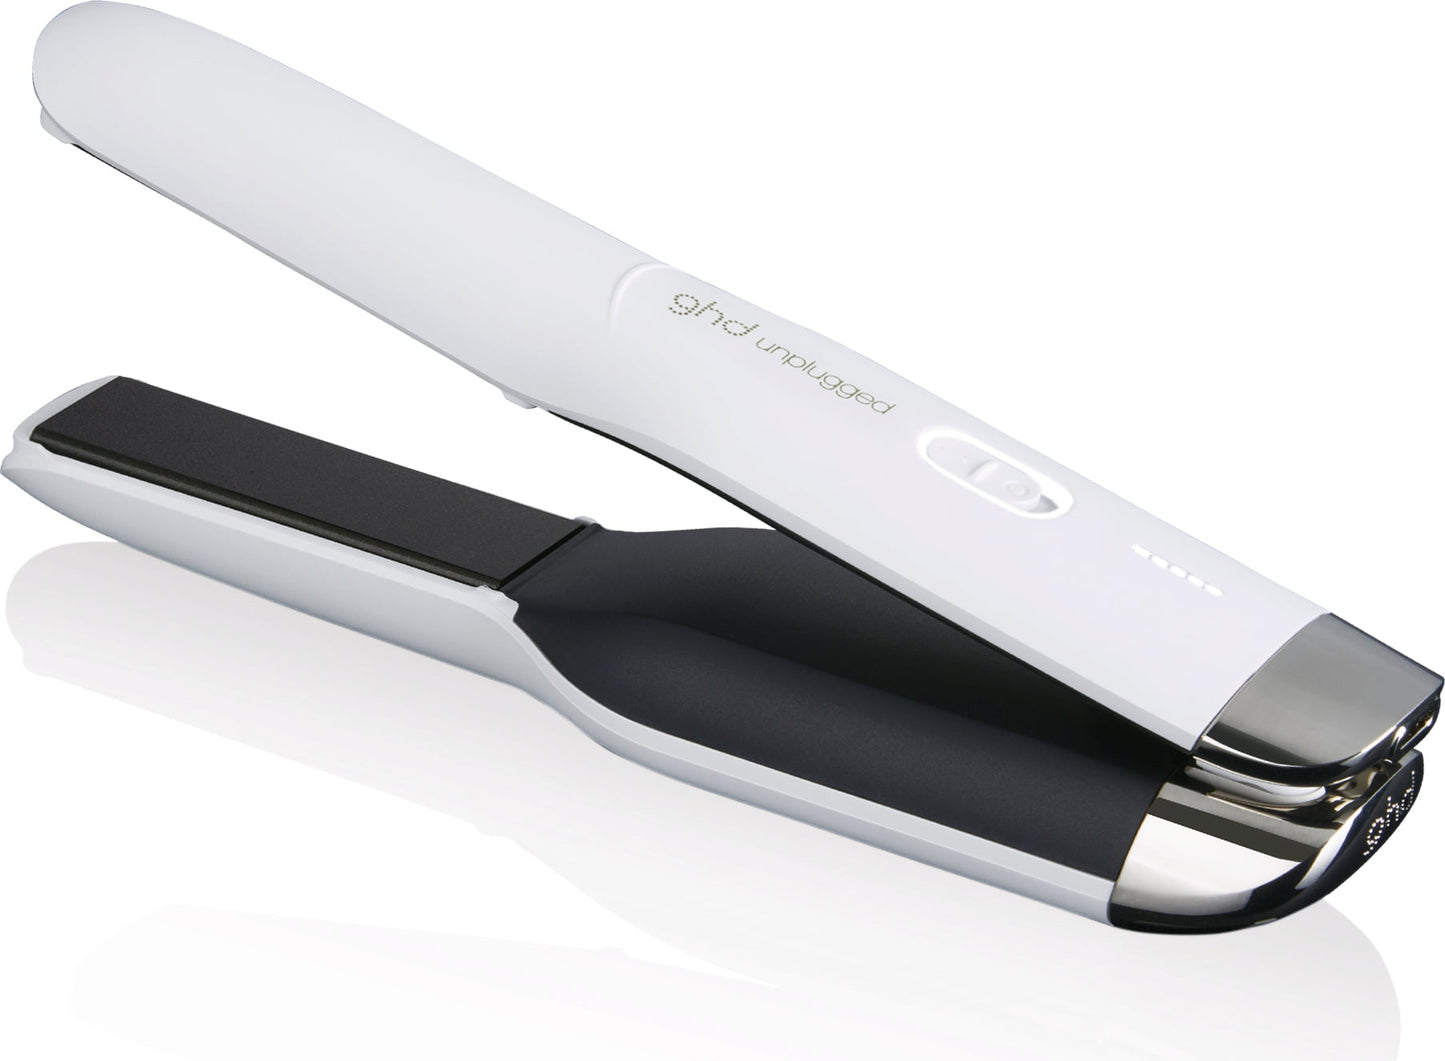 Buy Online ghd Latest Collections of Hair Styling